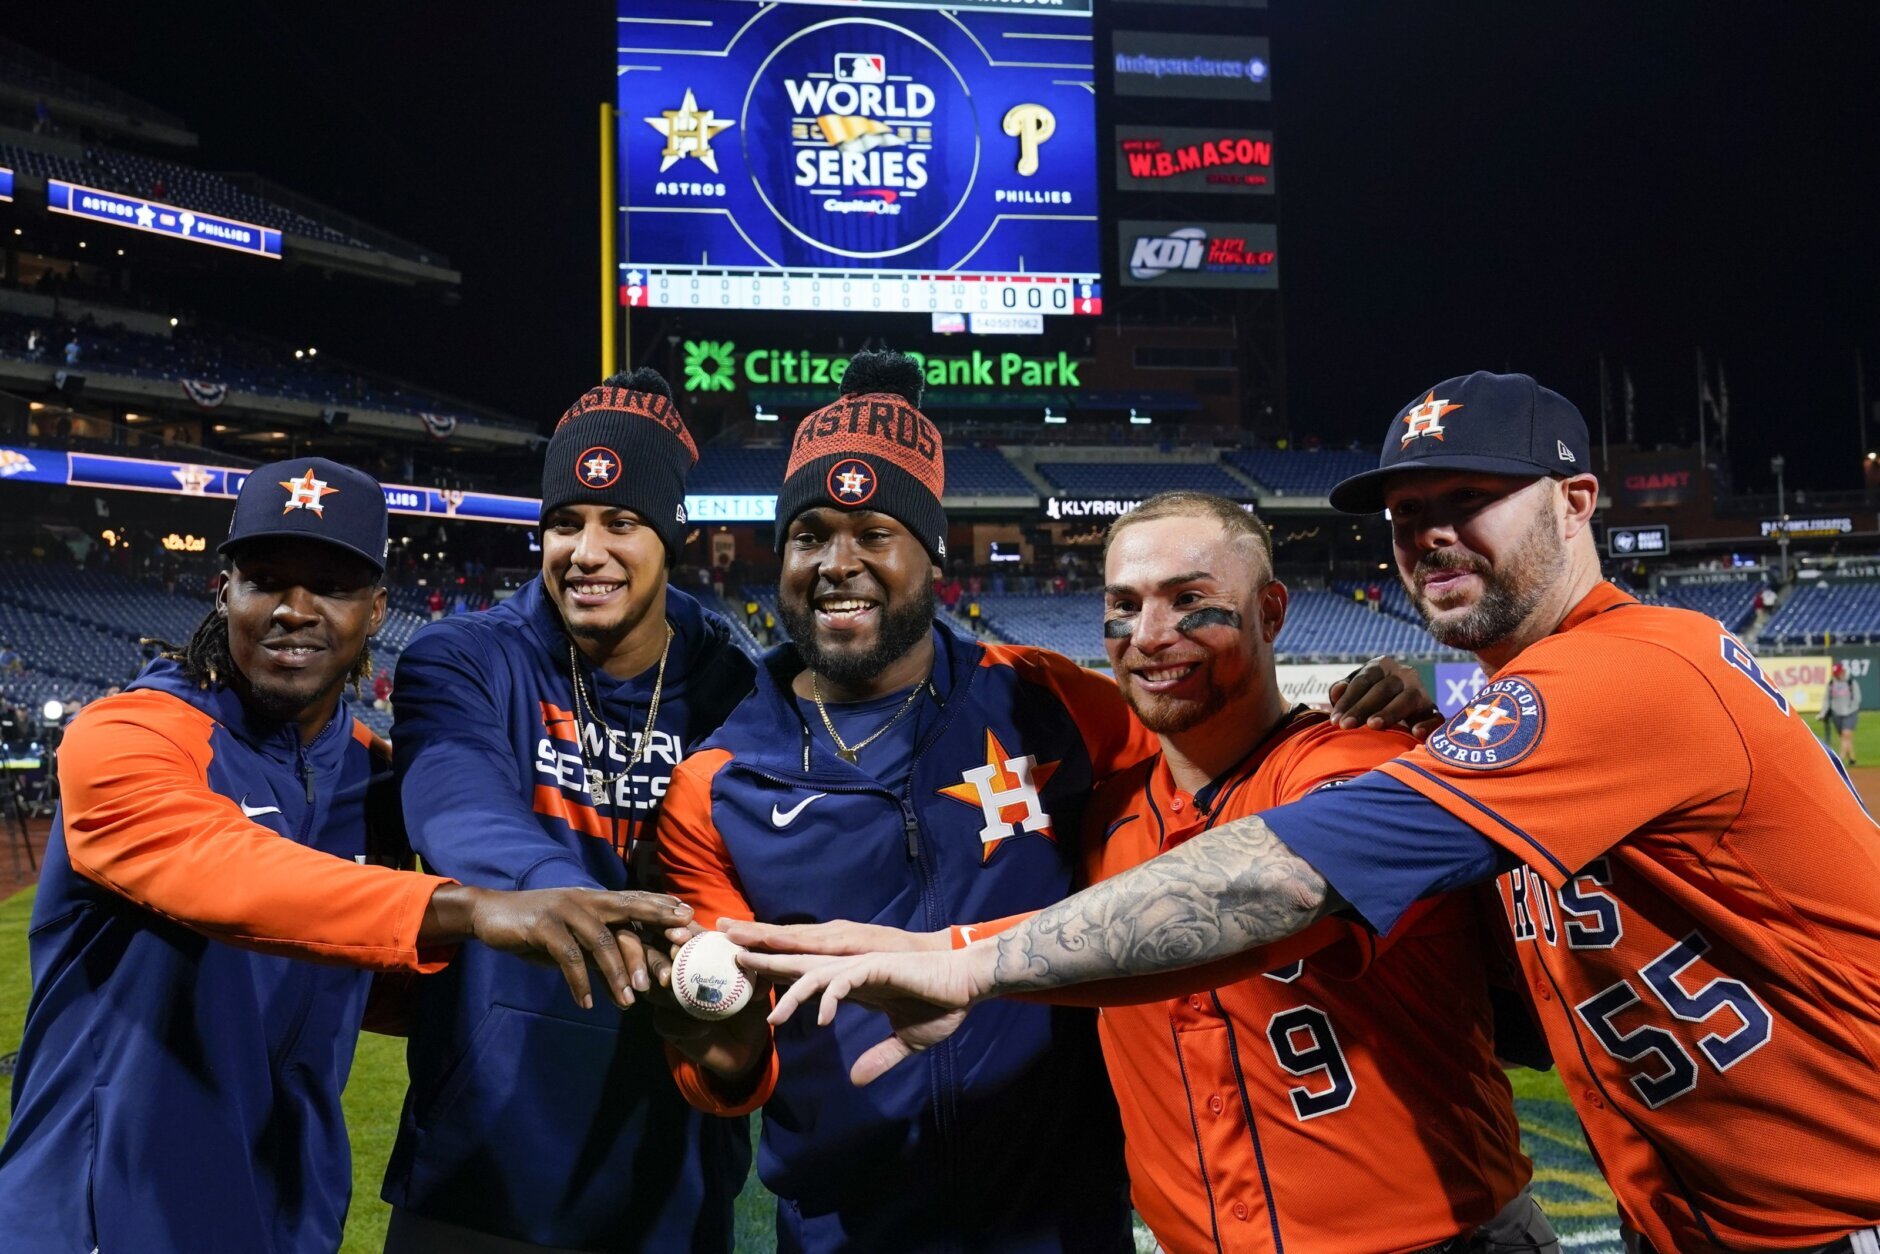 Recalling the Astros' previous Division Series win -- Chris